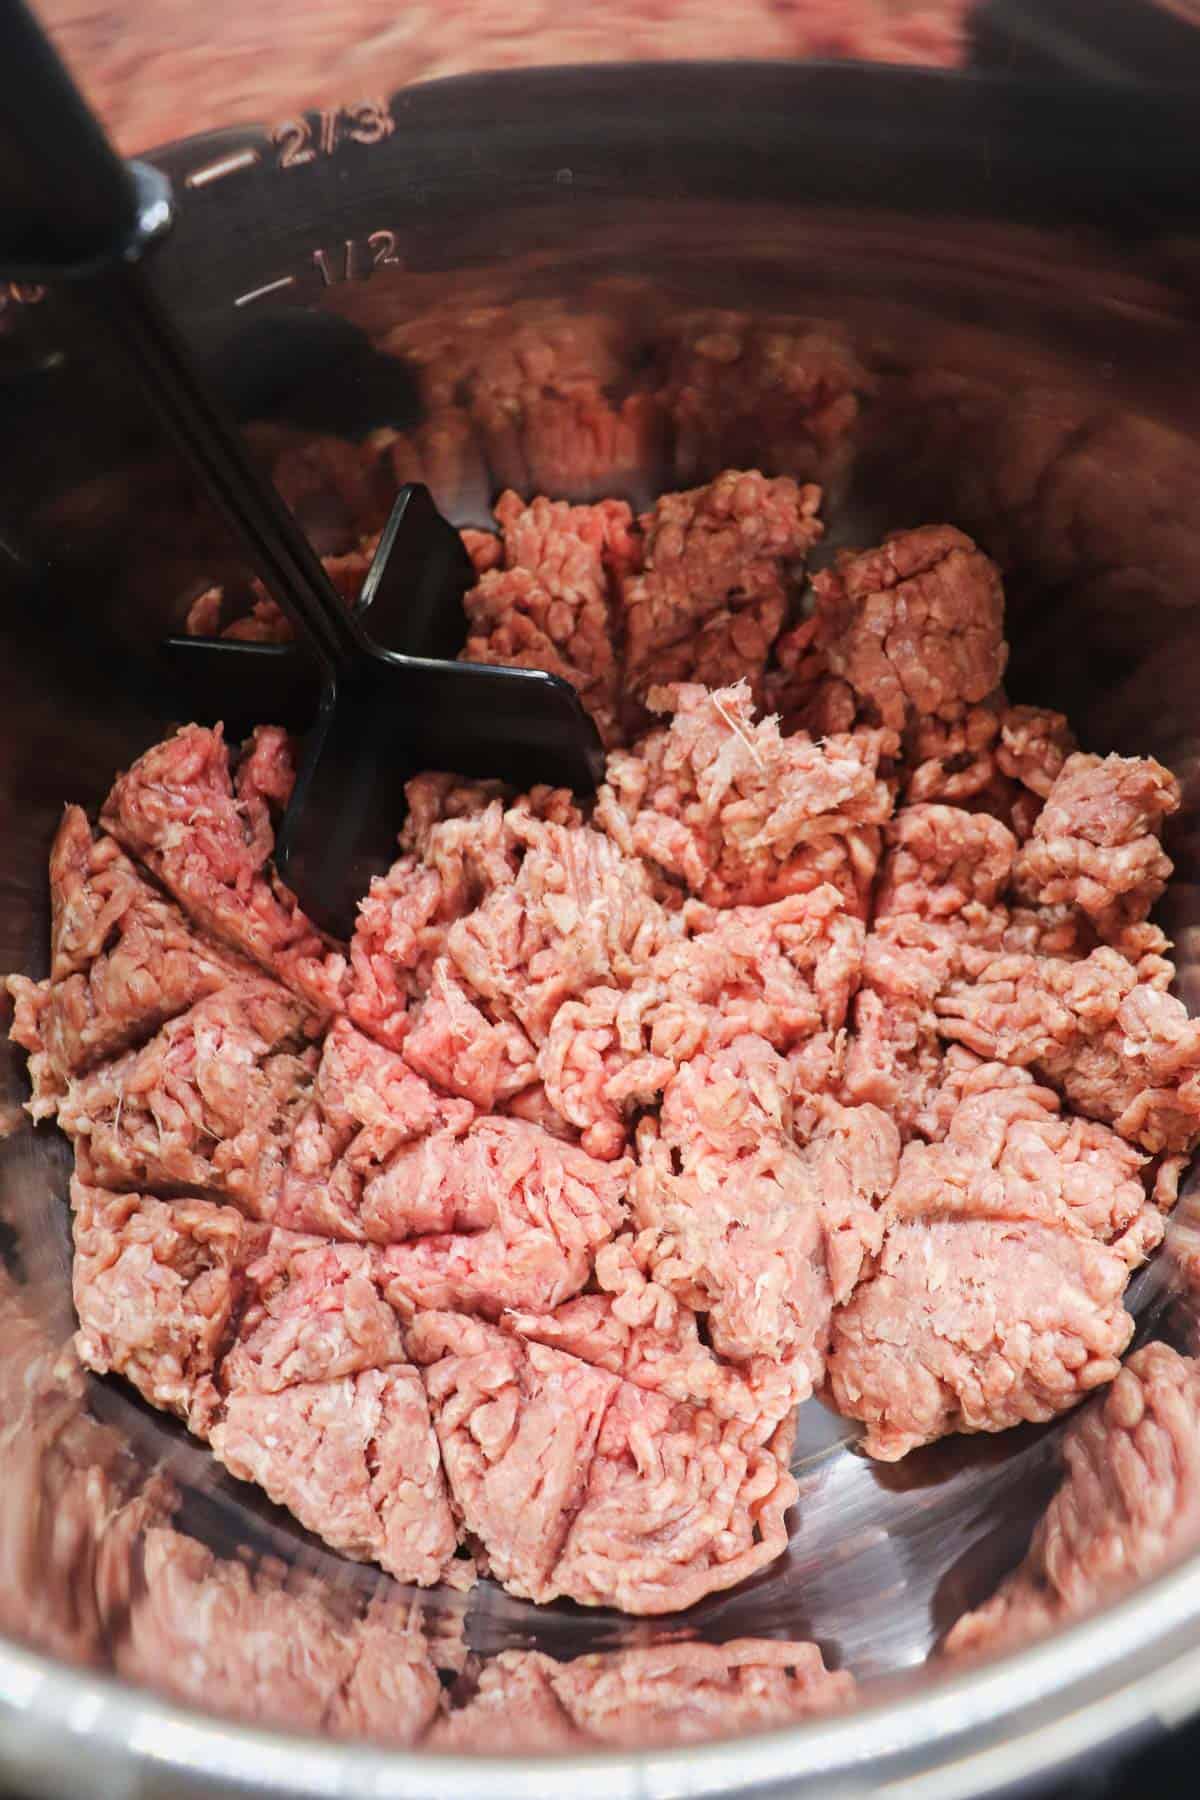 starting to cook raw ground beef in the instant pot liner